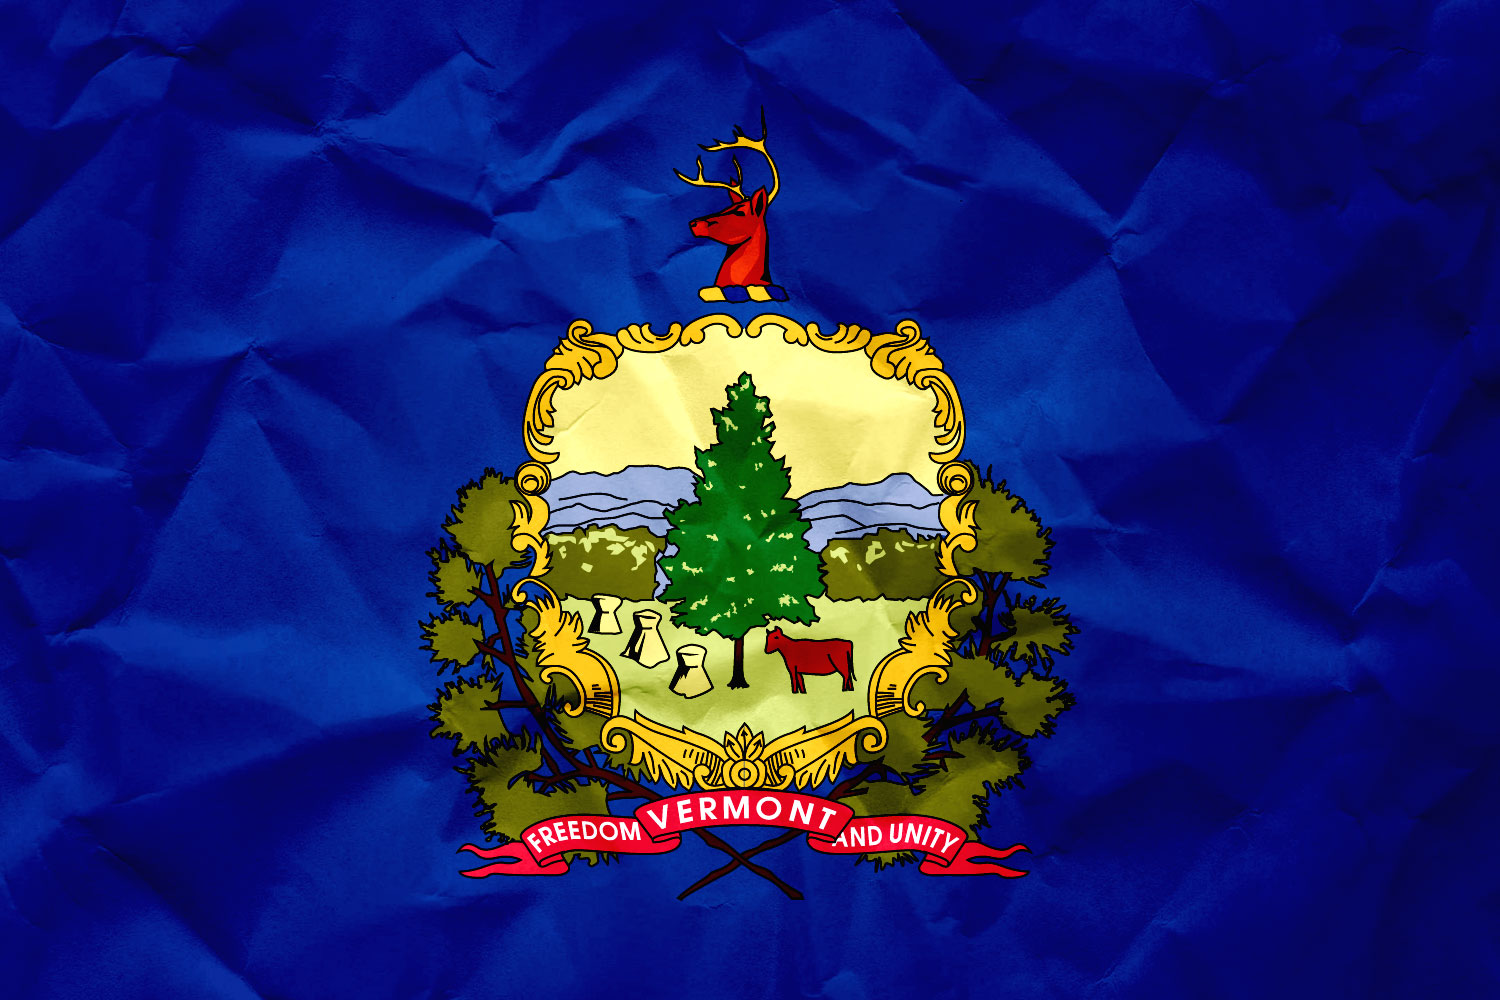 High Resolution Flag of Vermont Paper Texture